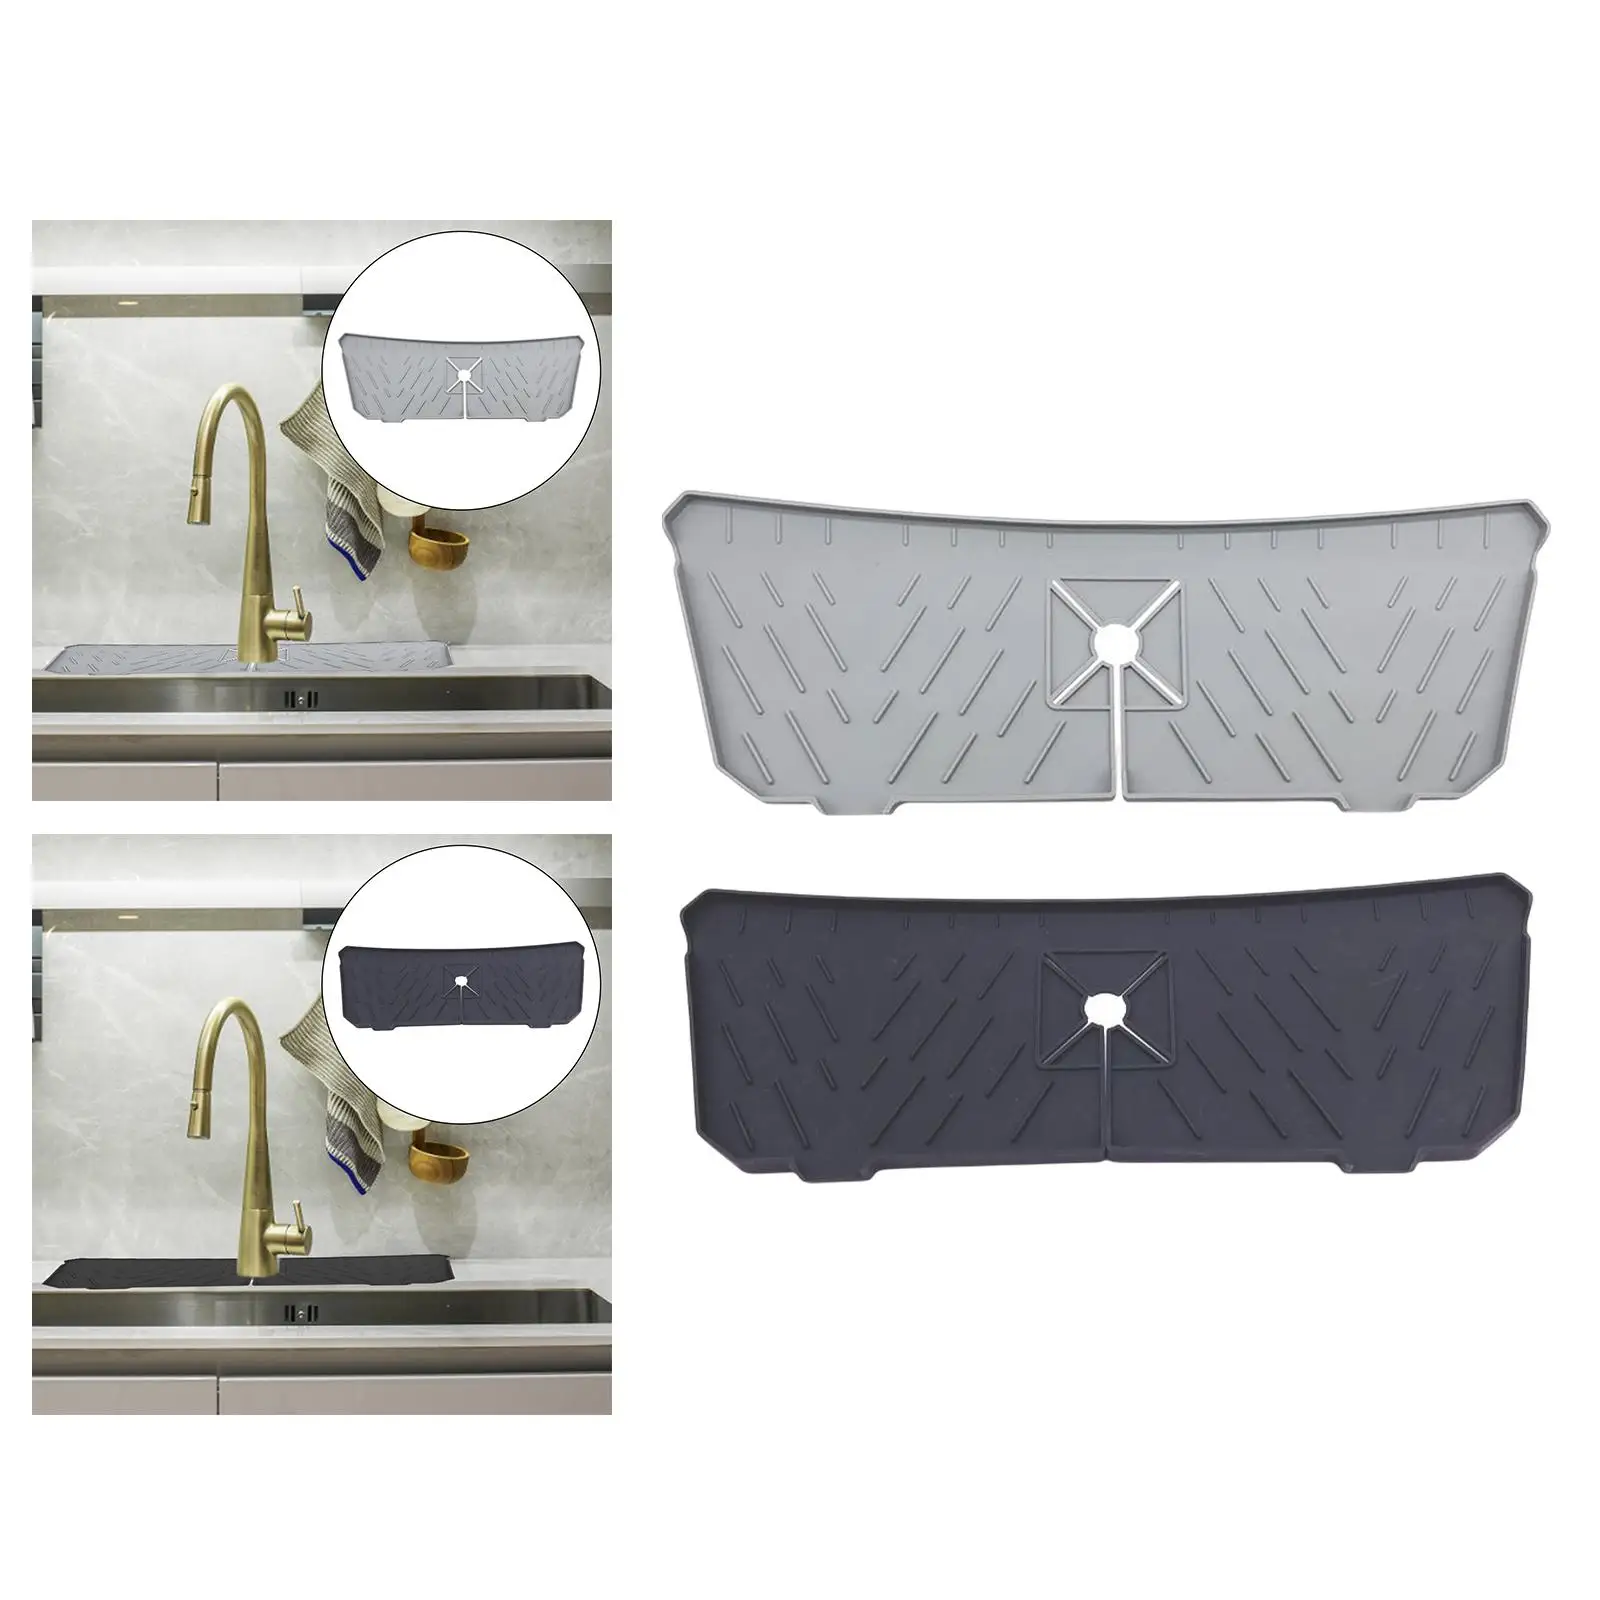 Kitchen Sink Holder Soap Tray Countertop Protector Sink splashing Guard Mats for Cafes